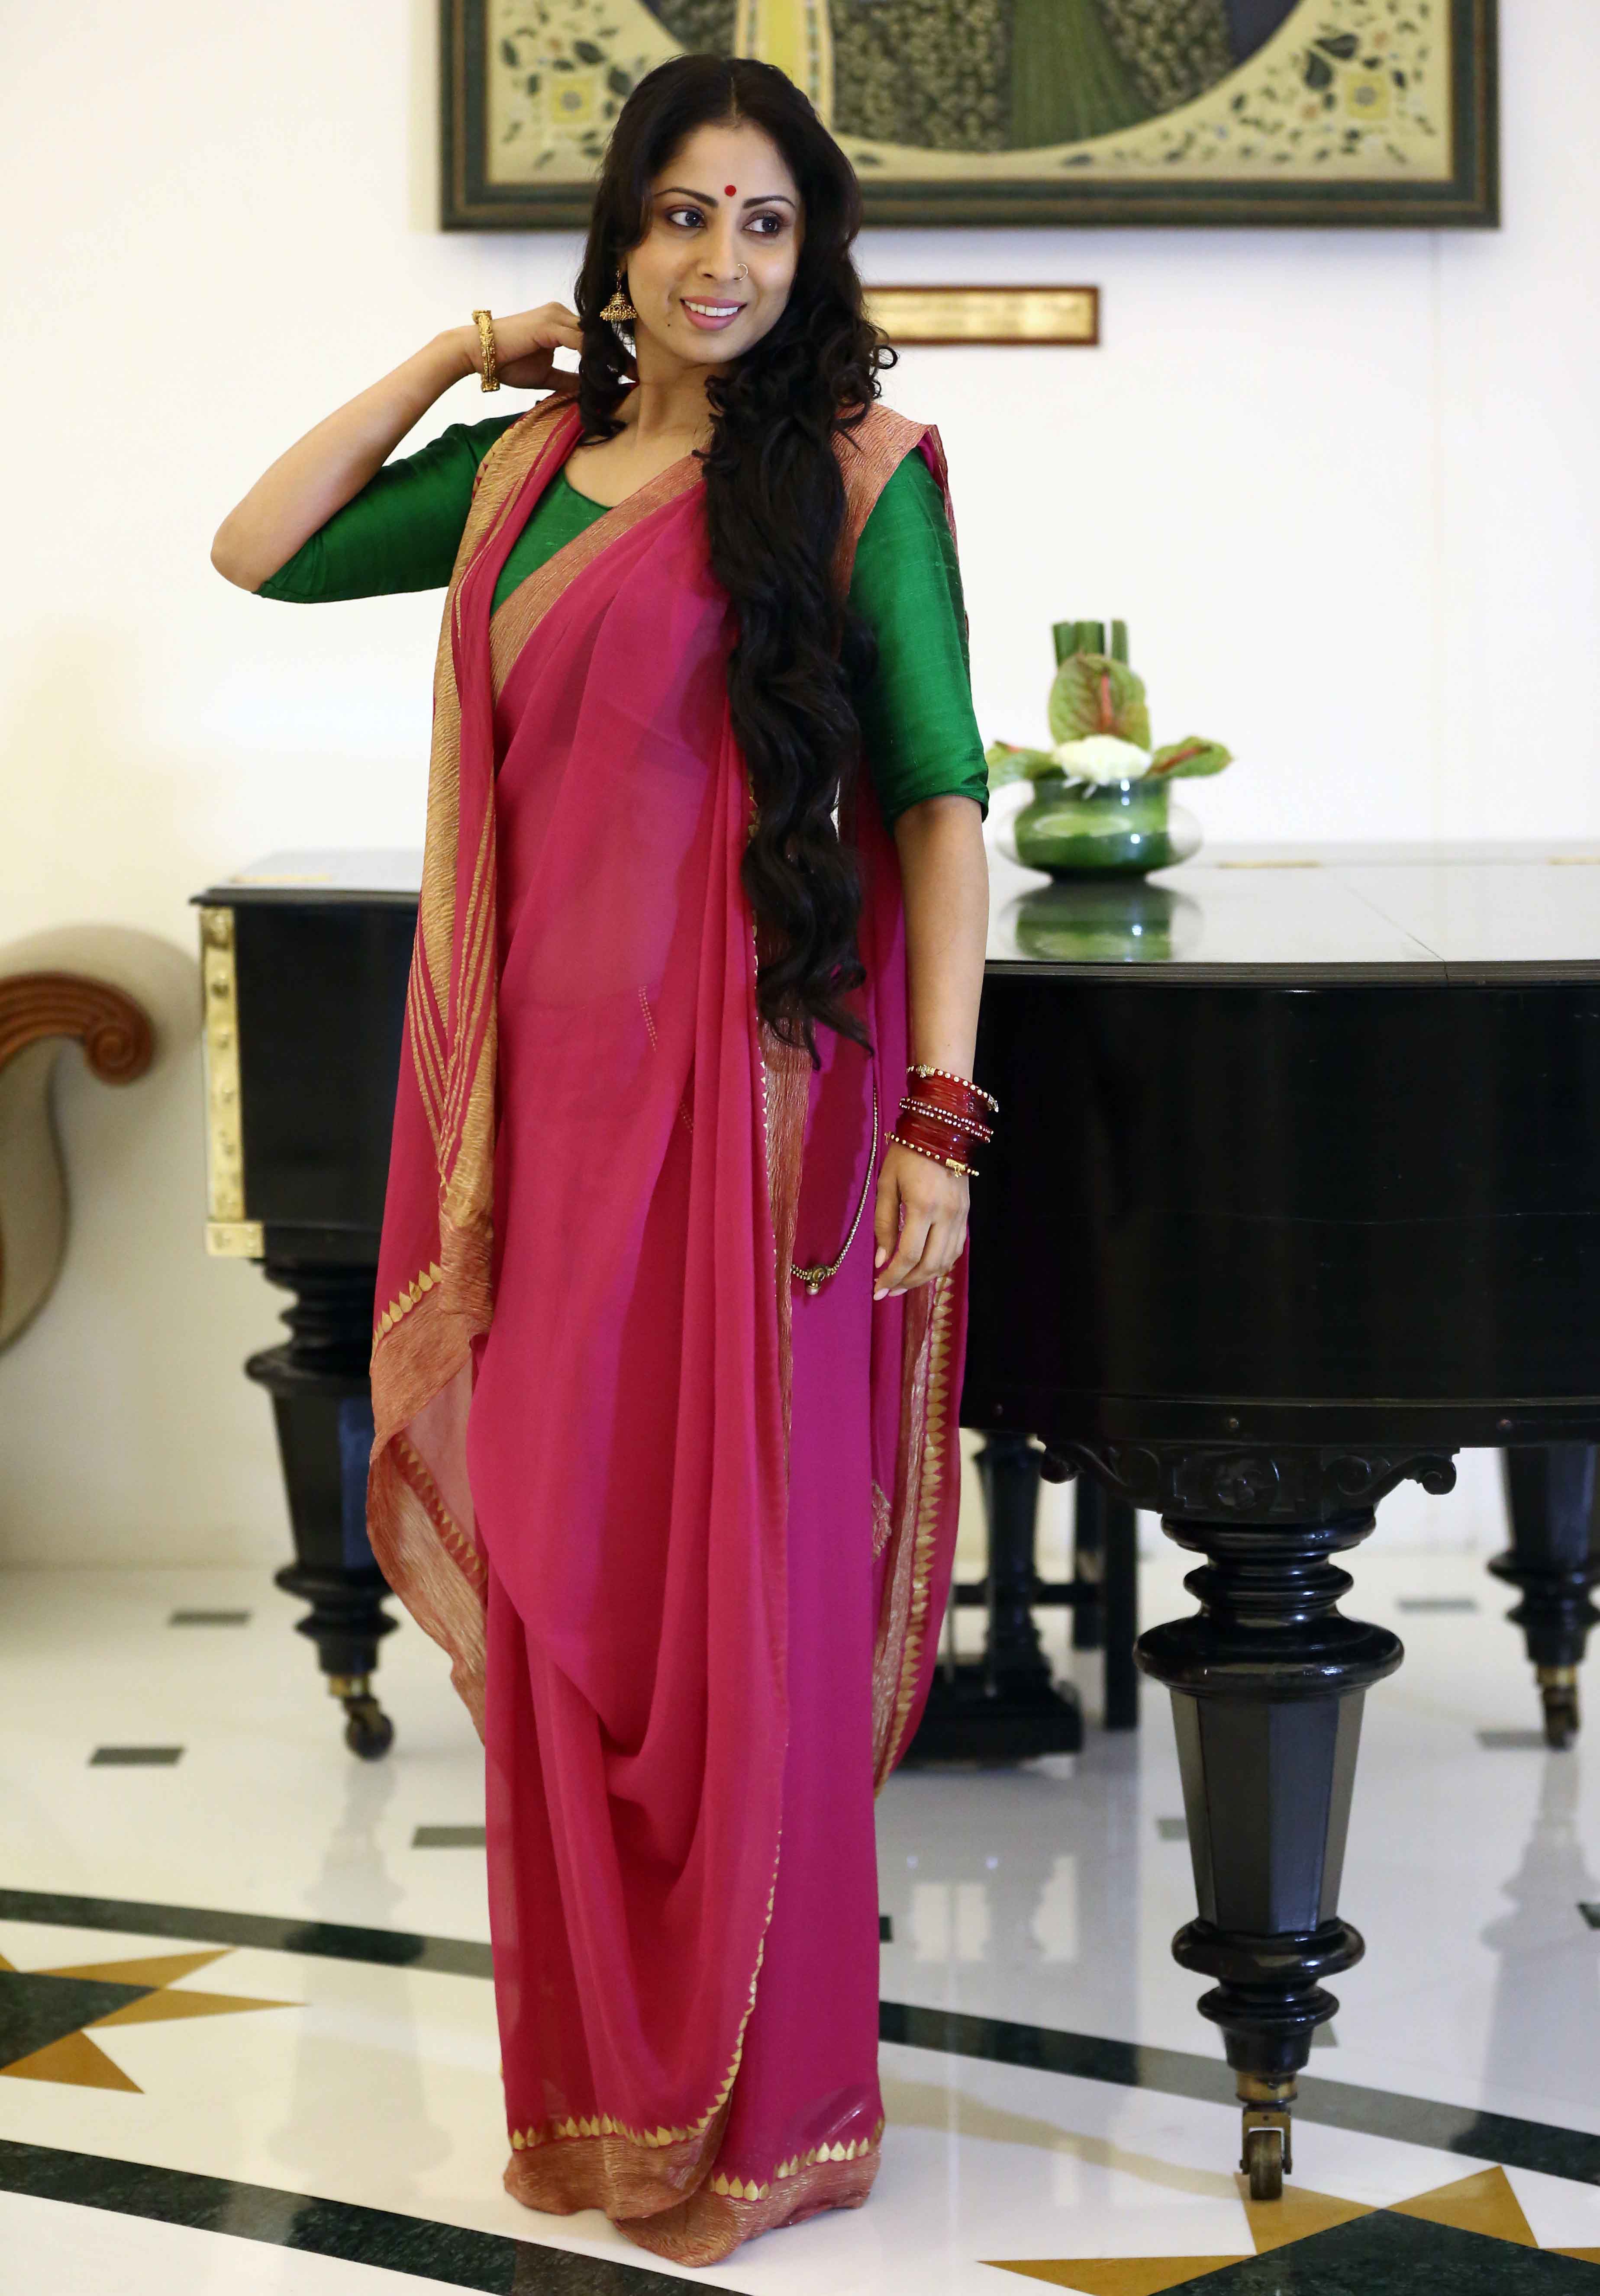 Sangita Ghosh Poses Gracefully For The Shutterbugs In Lucknow